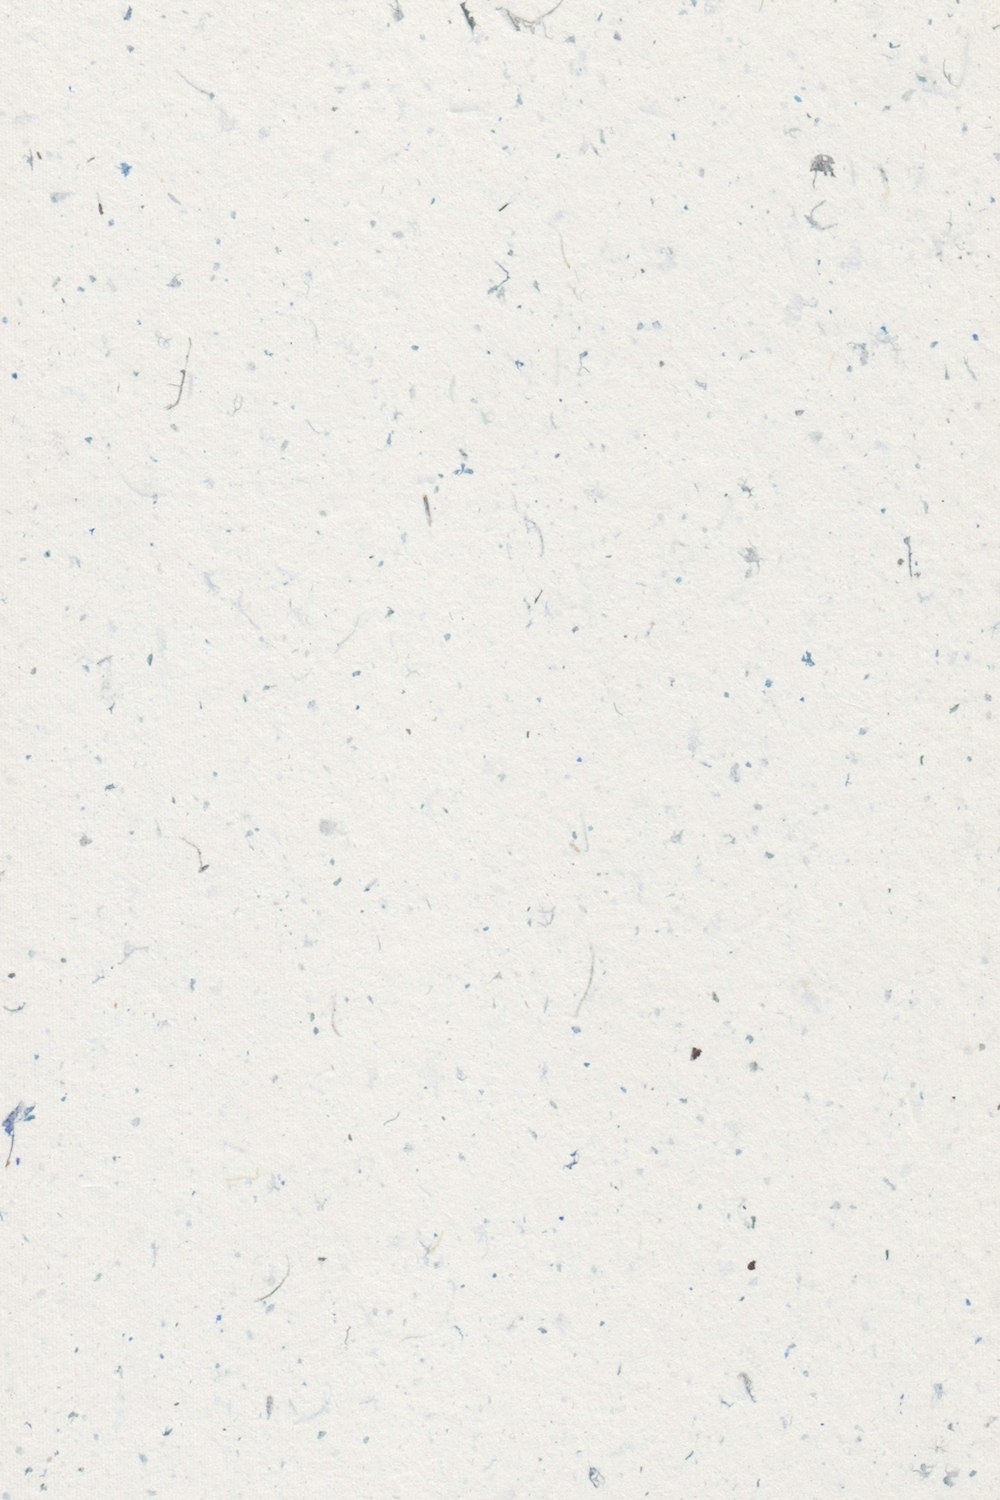 a white background with blue speckles on it